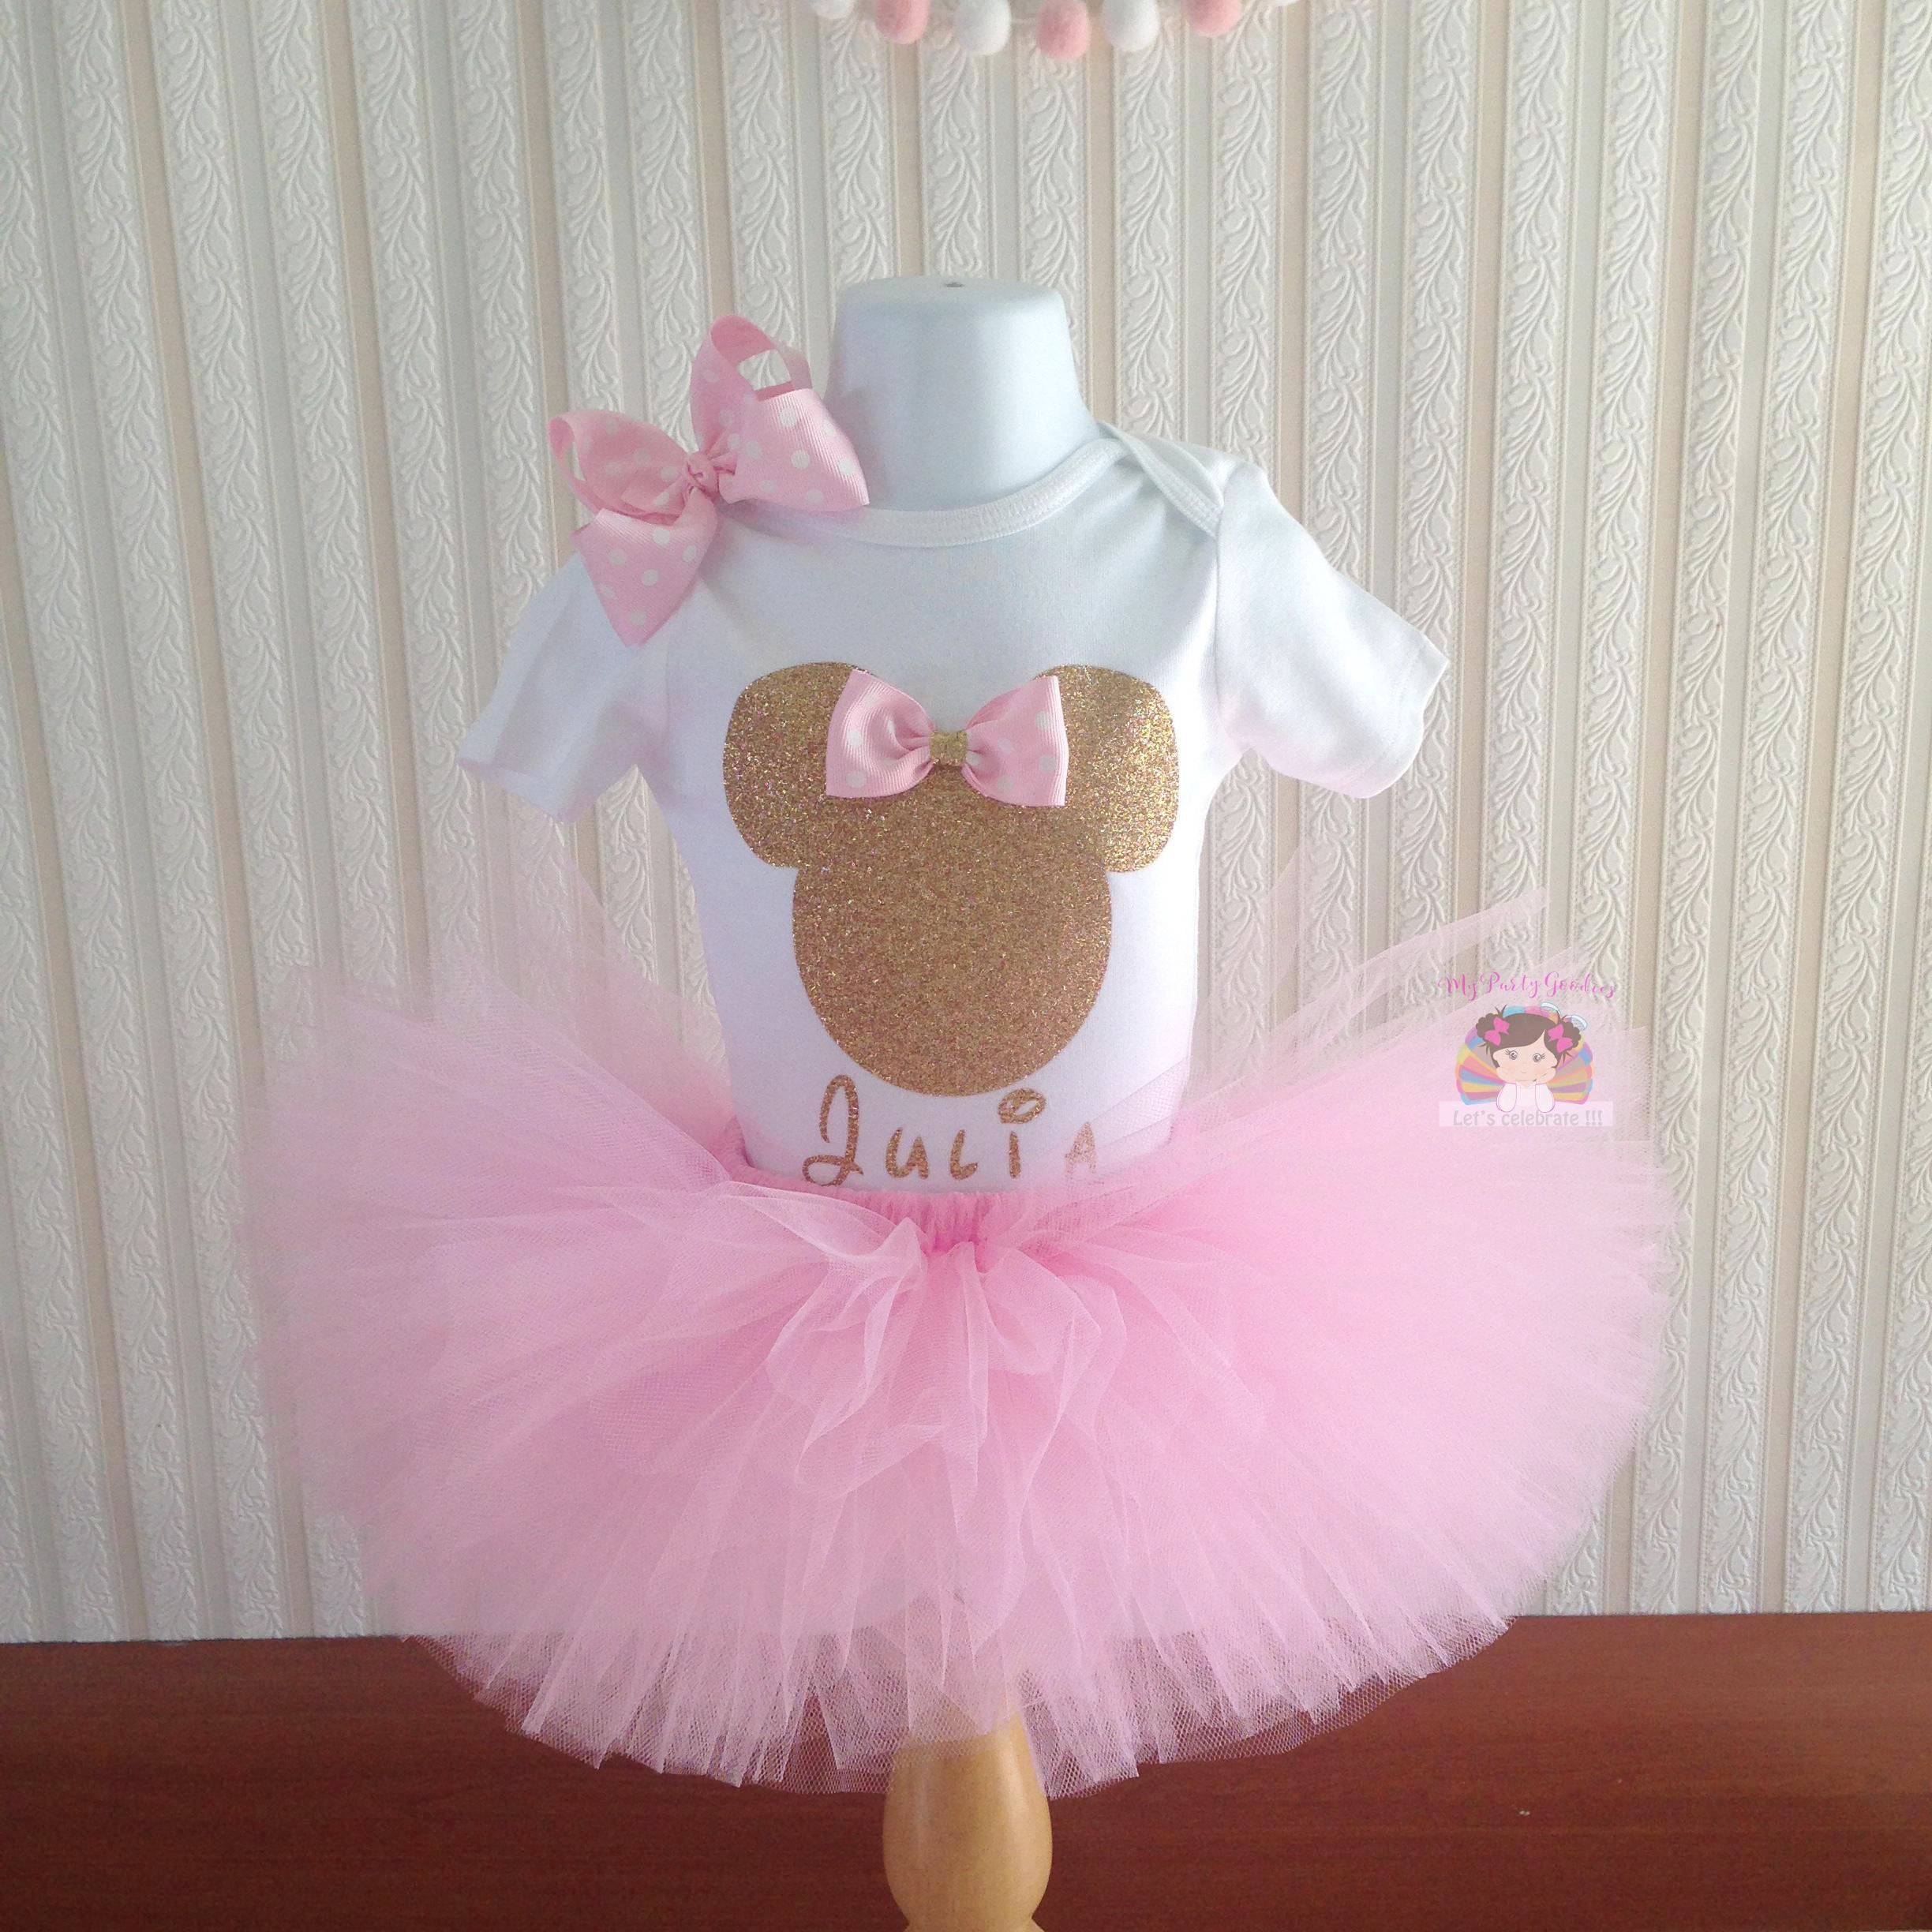 Baby Pink and Gold Minnie Mouse Tutu Set-First Pink birthday outfit